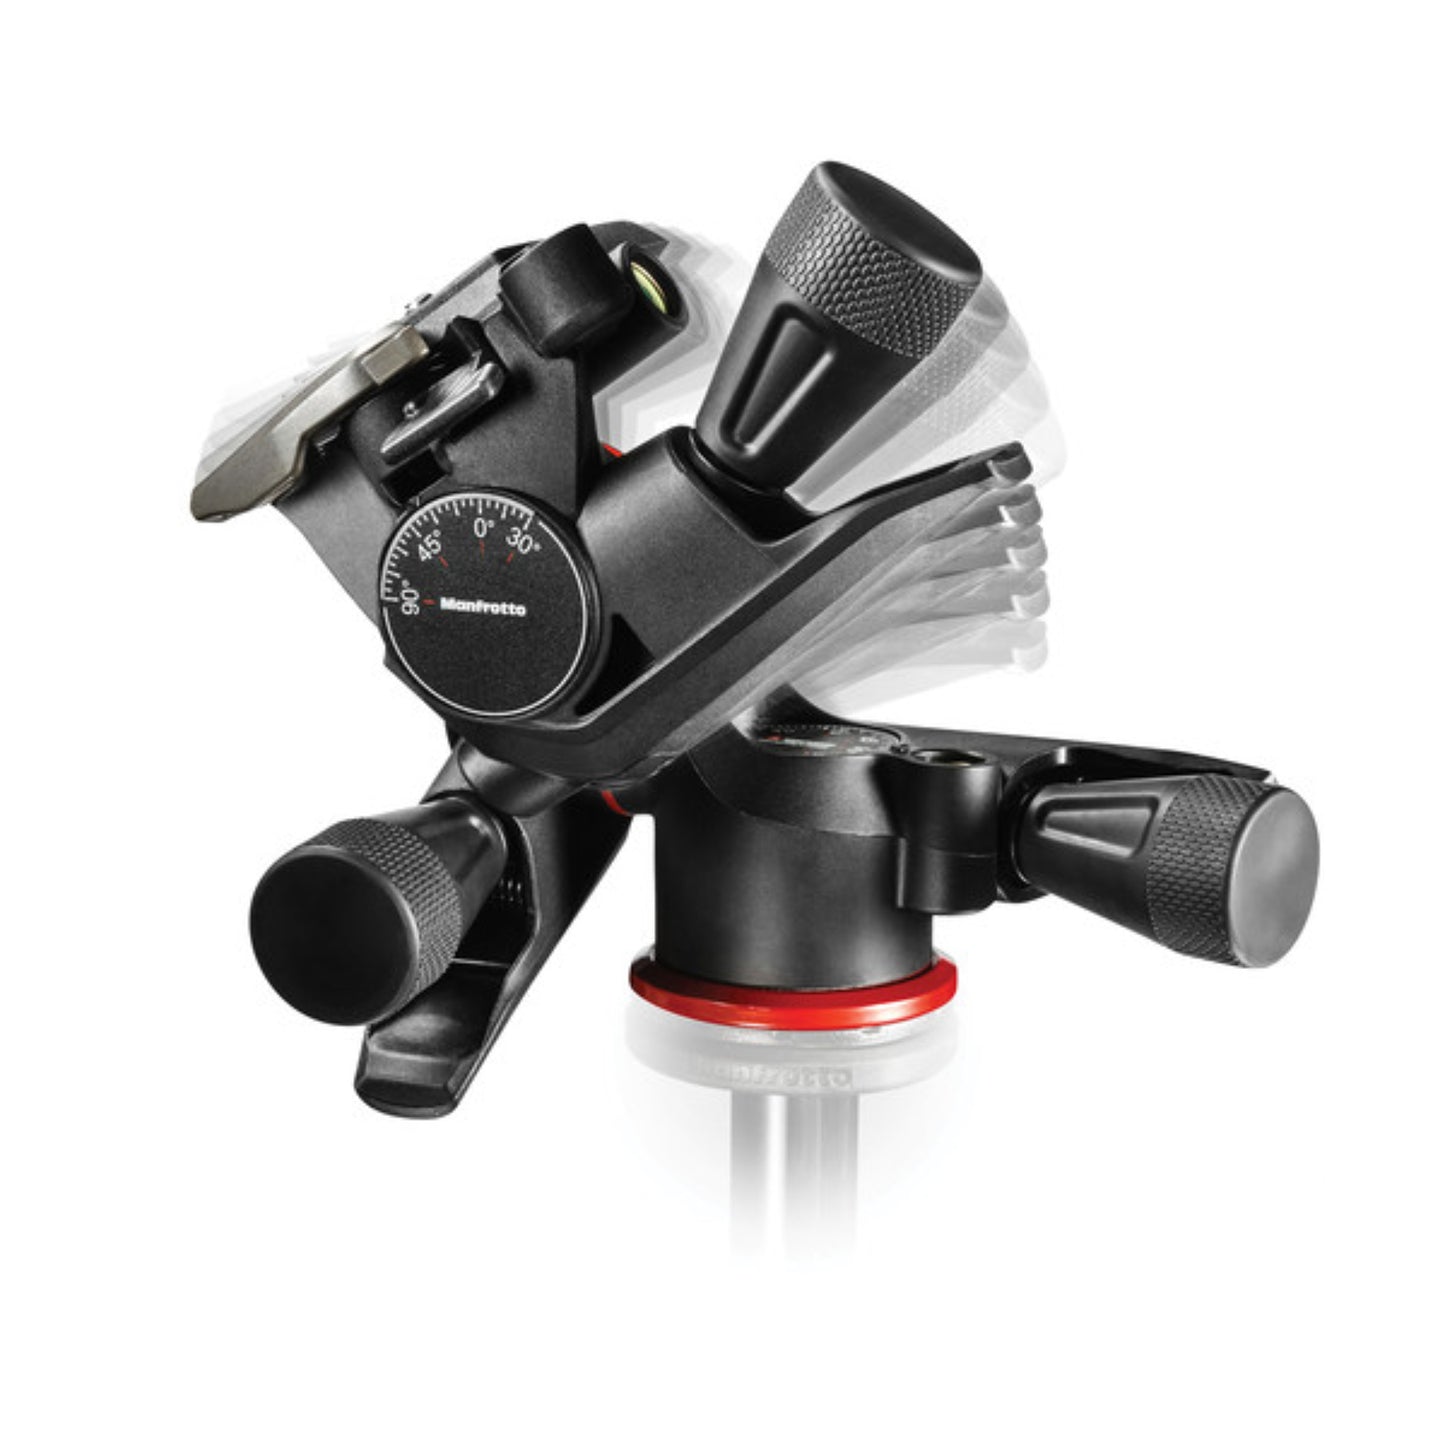 Manfrotto MHXPRO-3WG XPRO 3-Way geared head